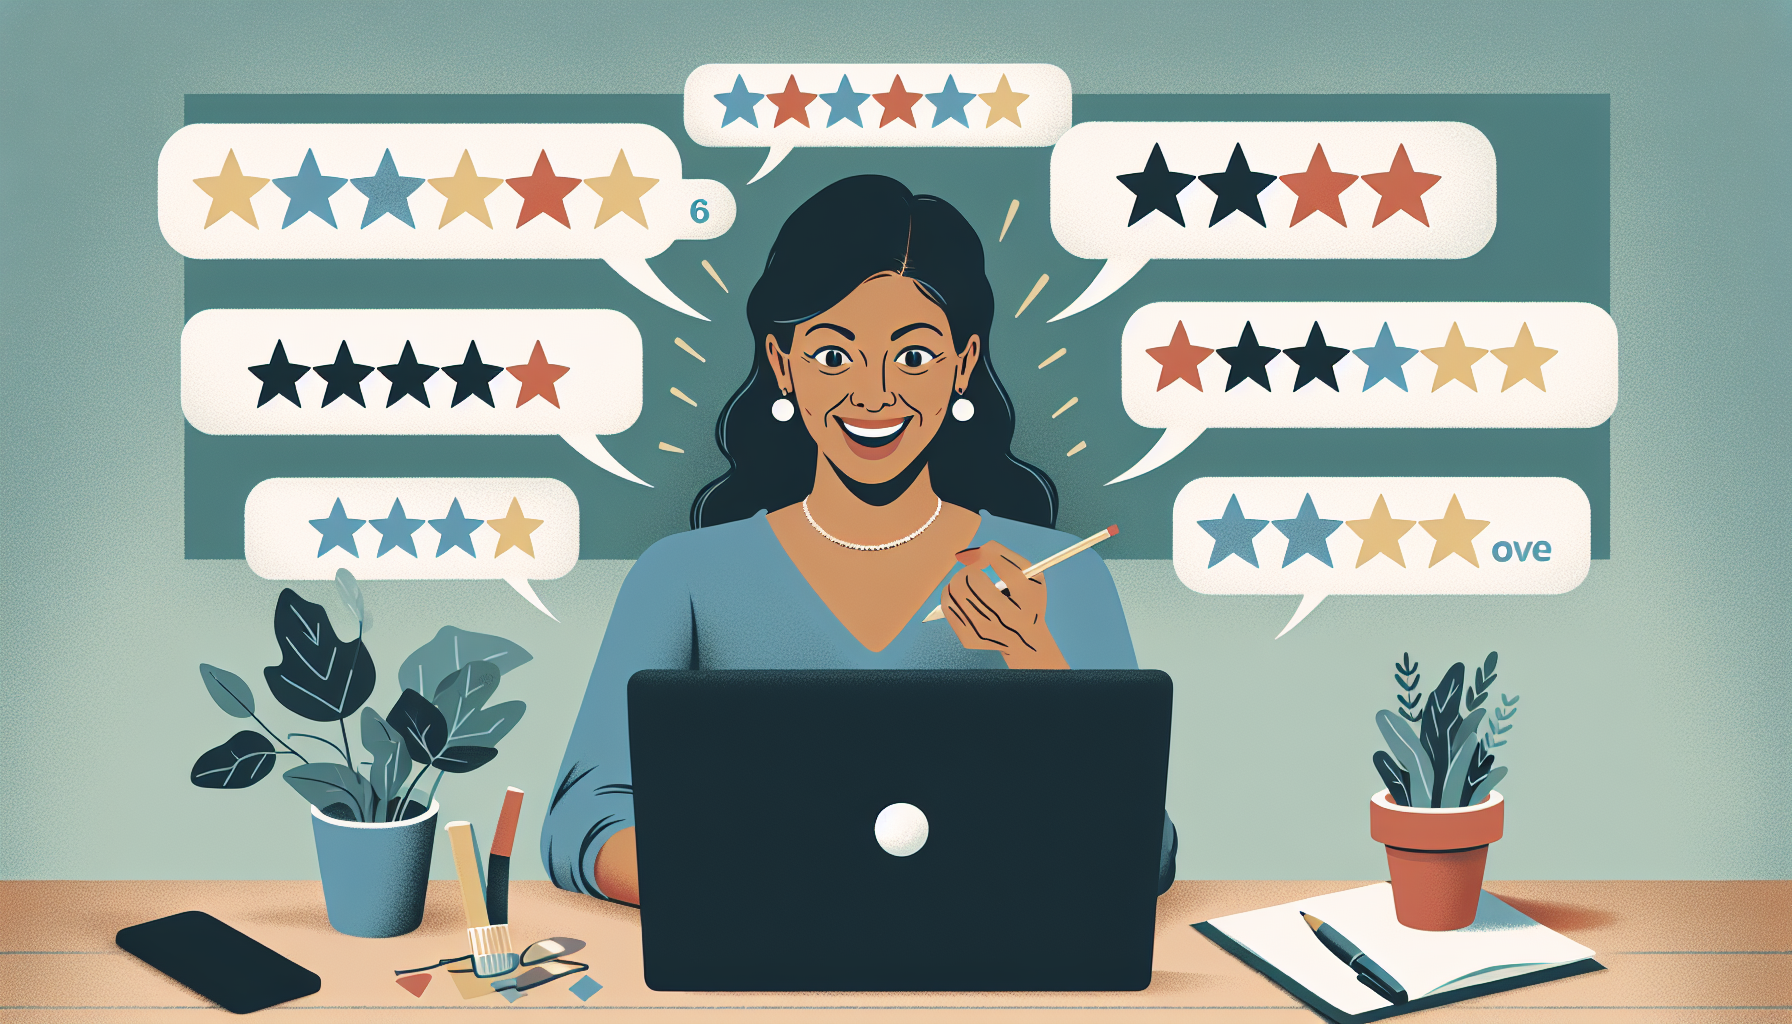 An inviting digital illustration of a small business owner happily engaging with customers on a laptop screen displaying the Facebook reviews section, with a variety of five-star ratings and positive